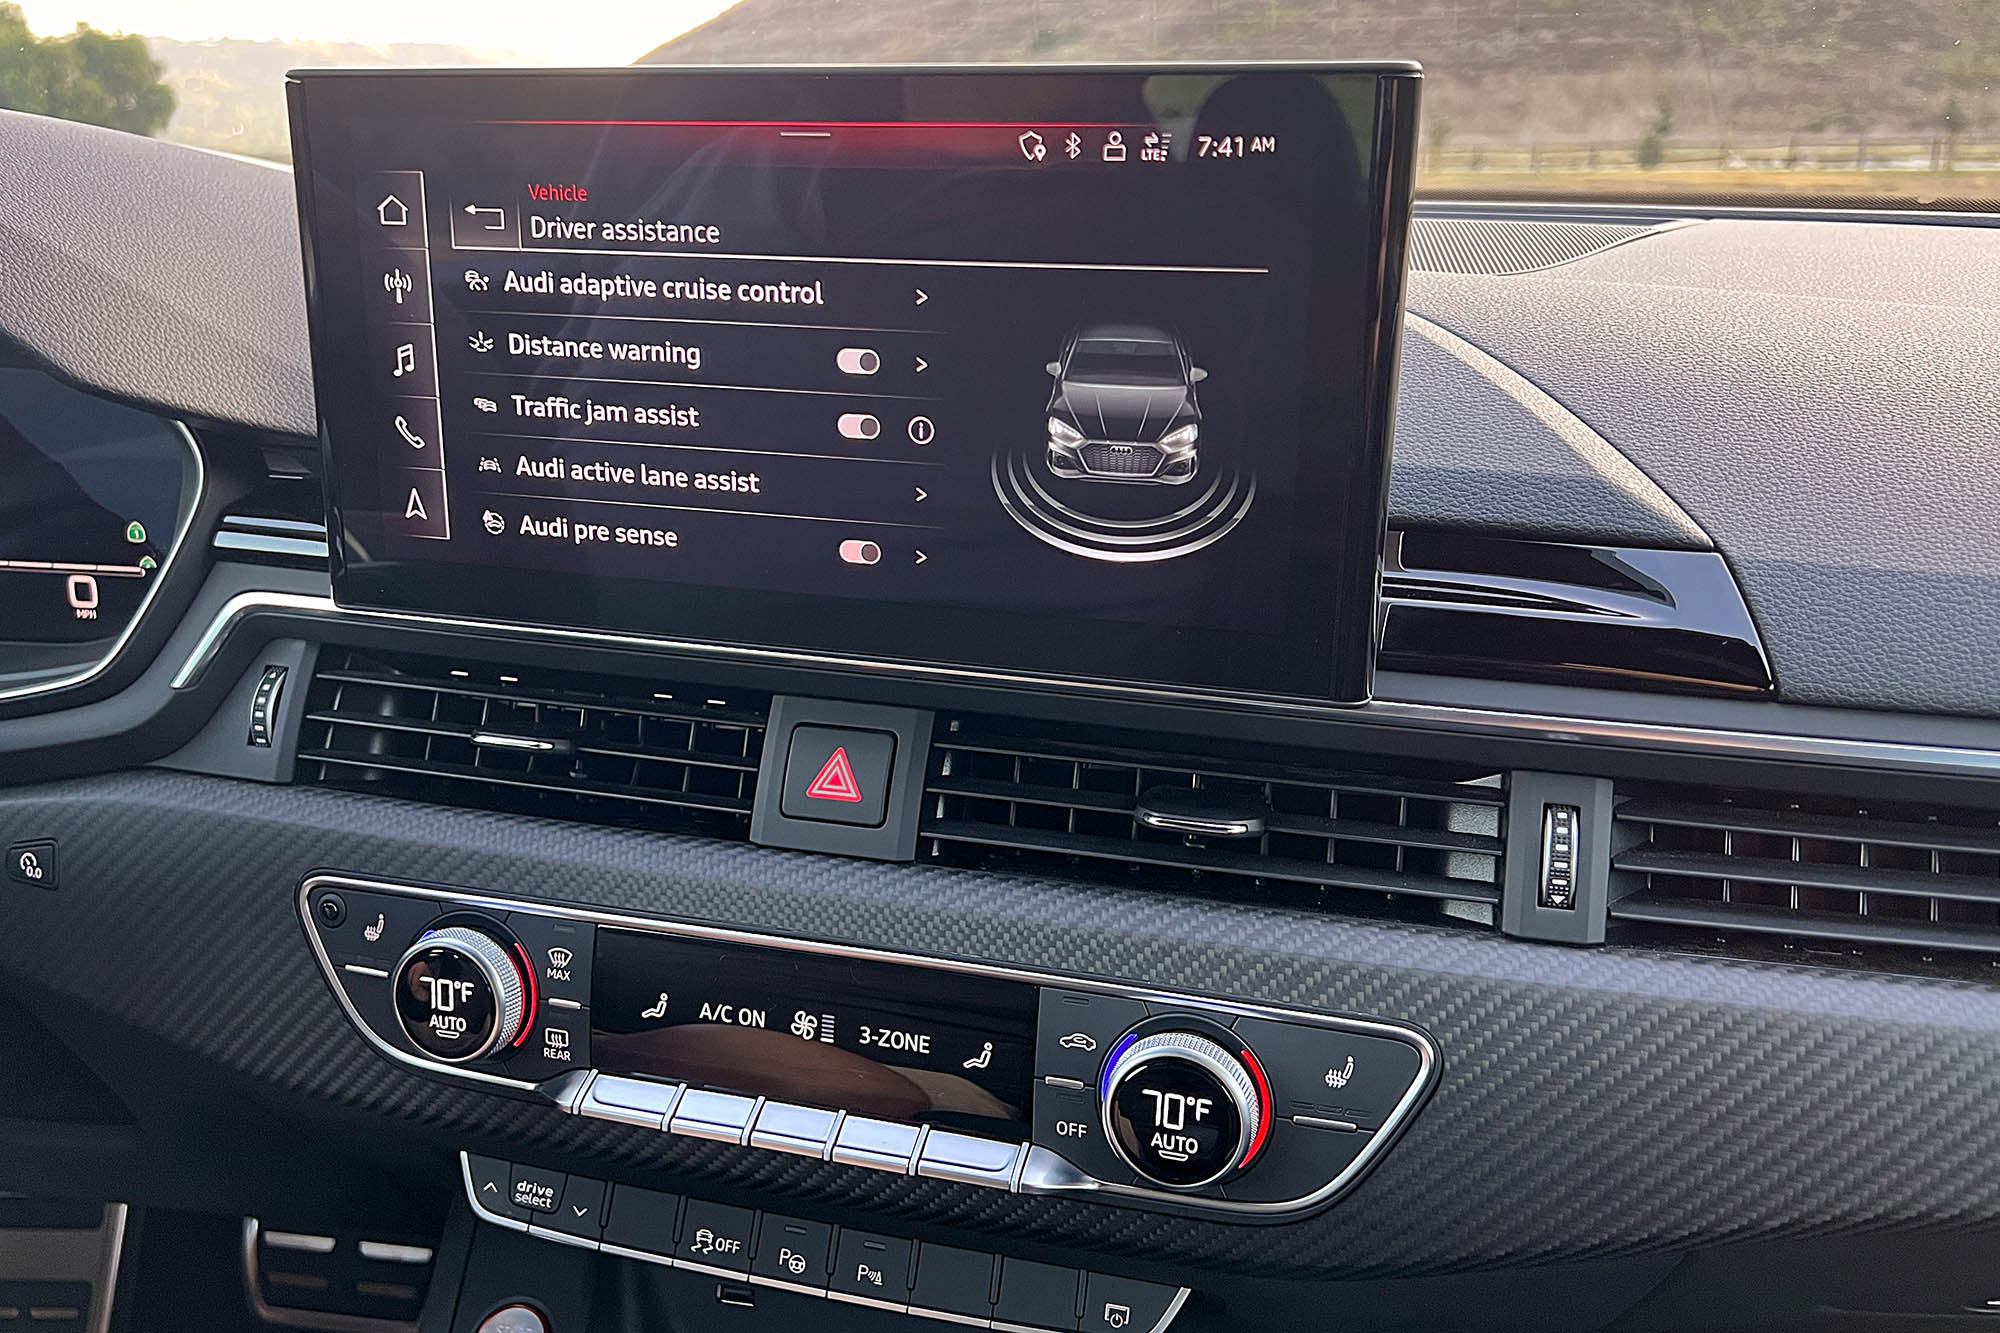 Infotainment screen of a 2023 Audi RS 5 showing safety information